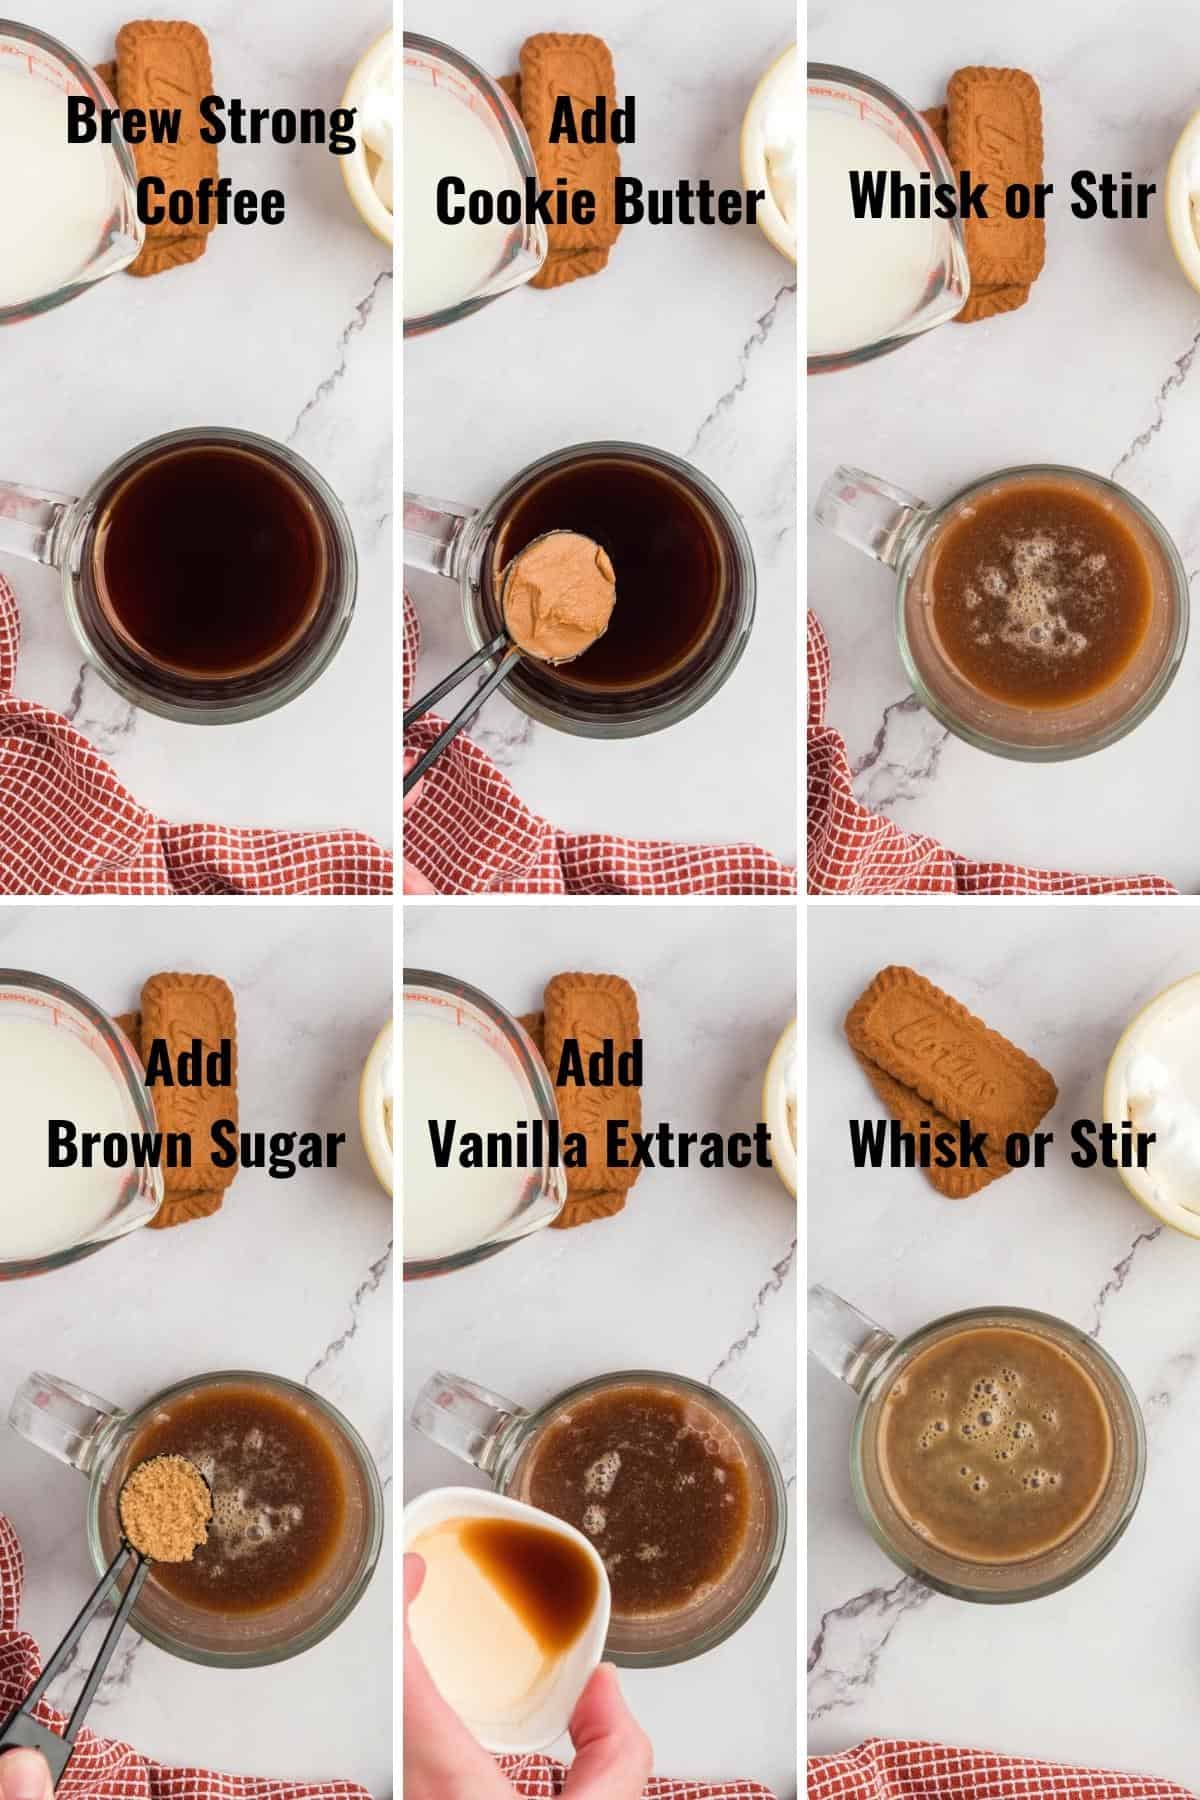 Collage images showing steps to add cookie butter, brown sugar, and vanilla to coffee.